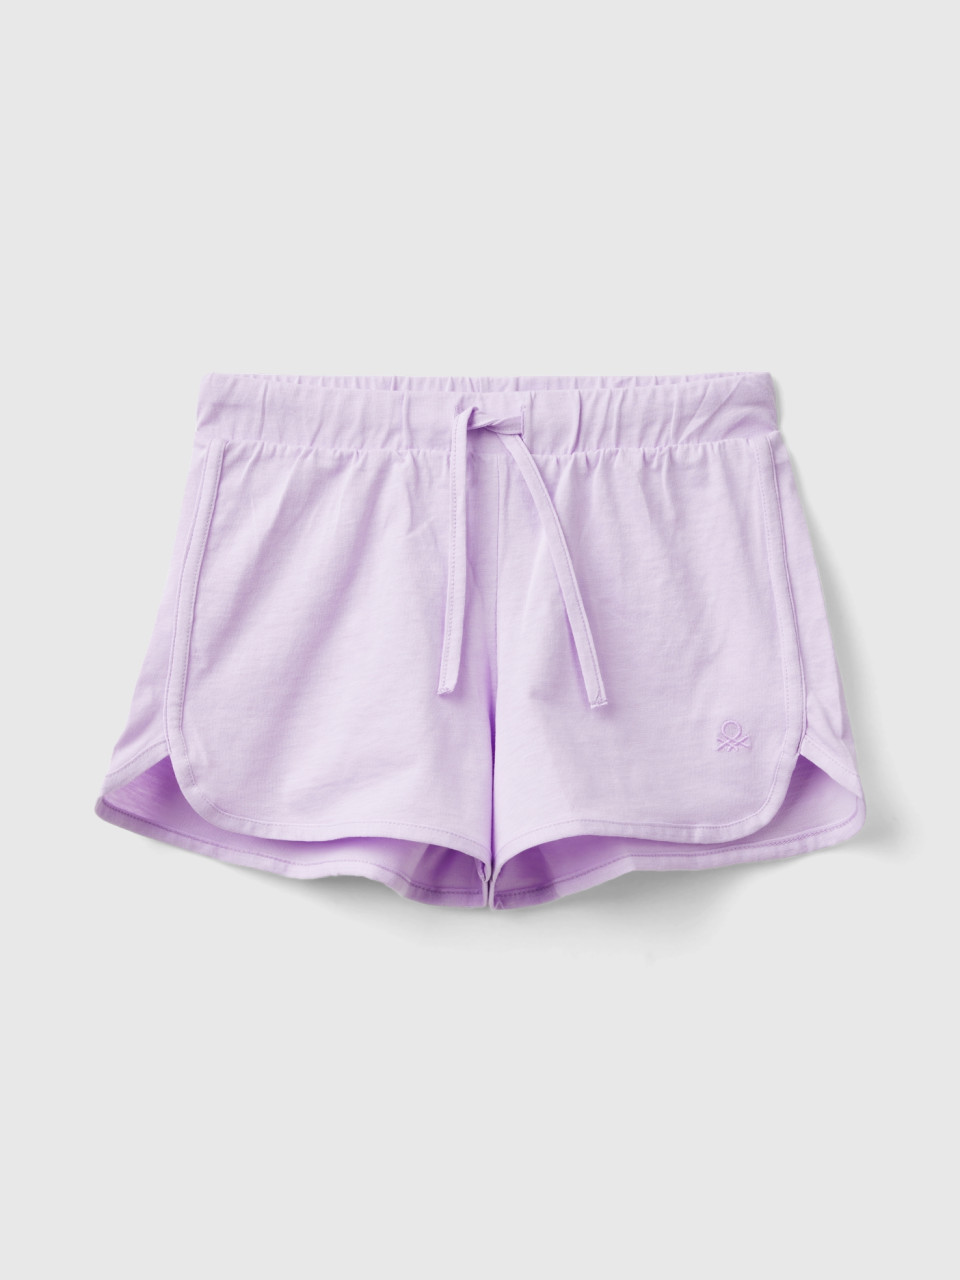 Benetton, Runner Style Shorts In Organic Cotton, Lilac, Kids